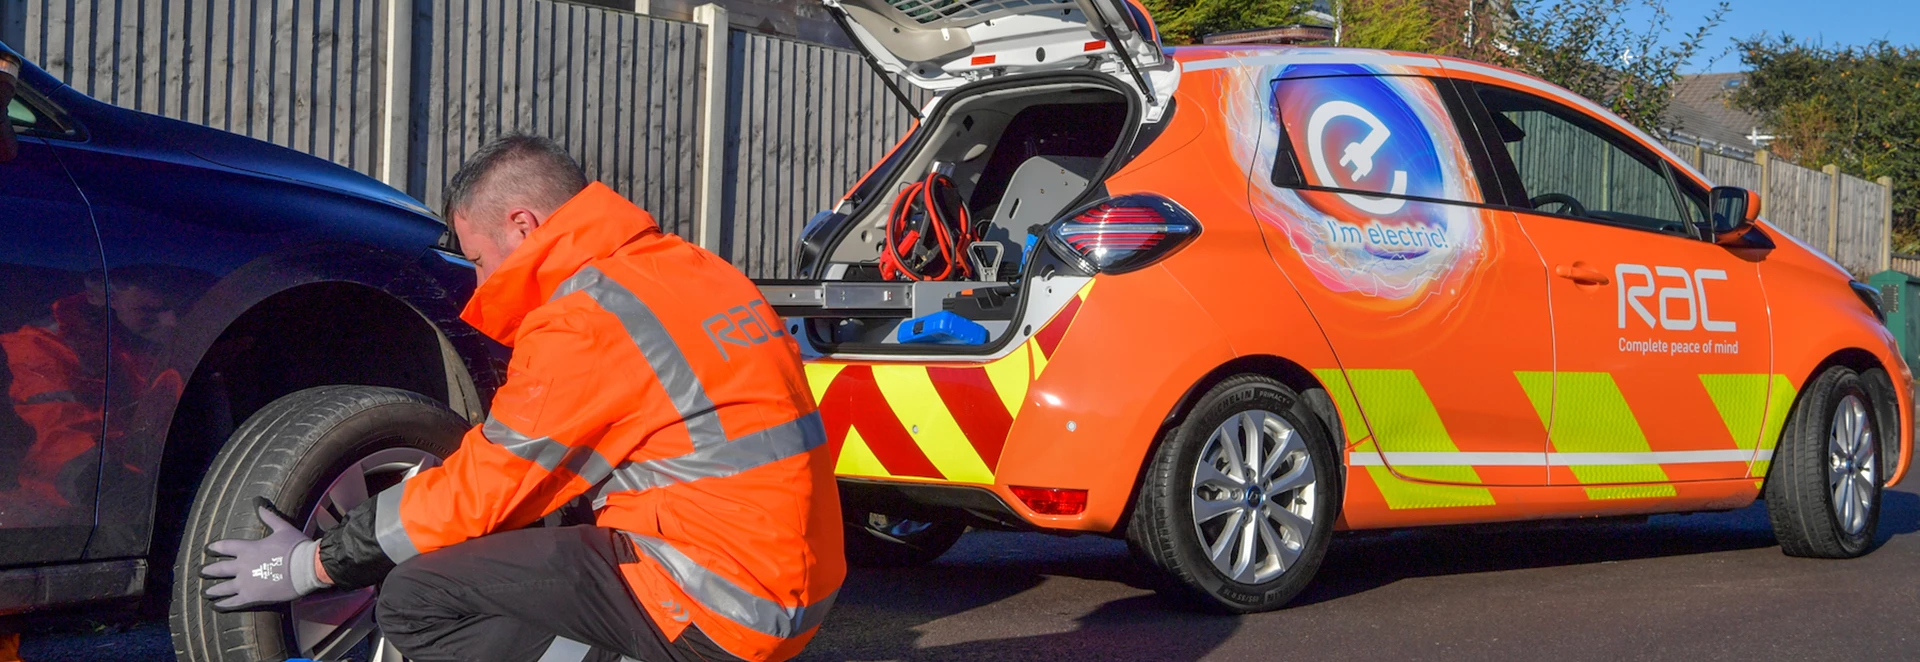 RAC launches electric patrol van to help with breakdowns 